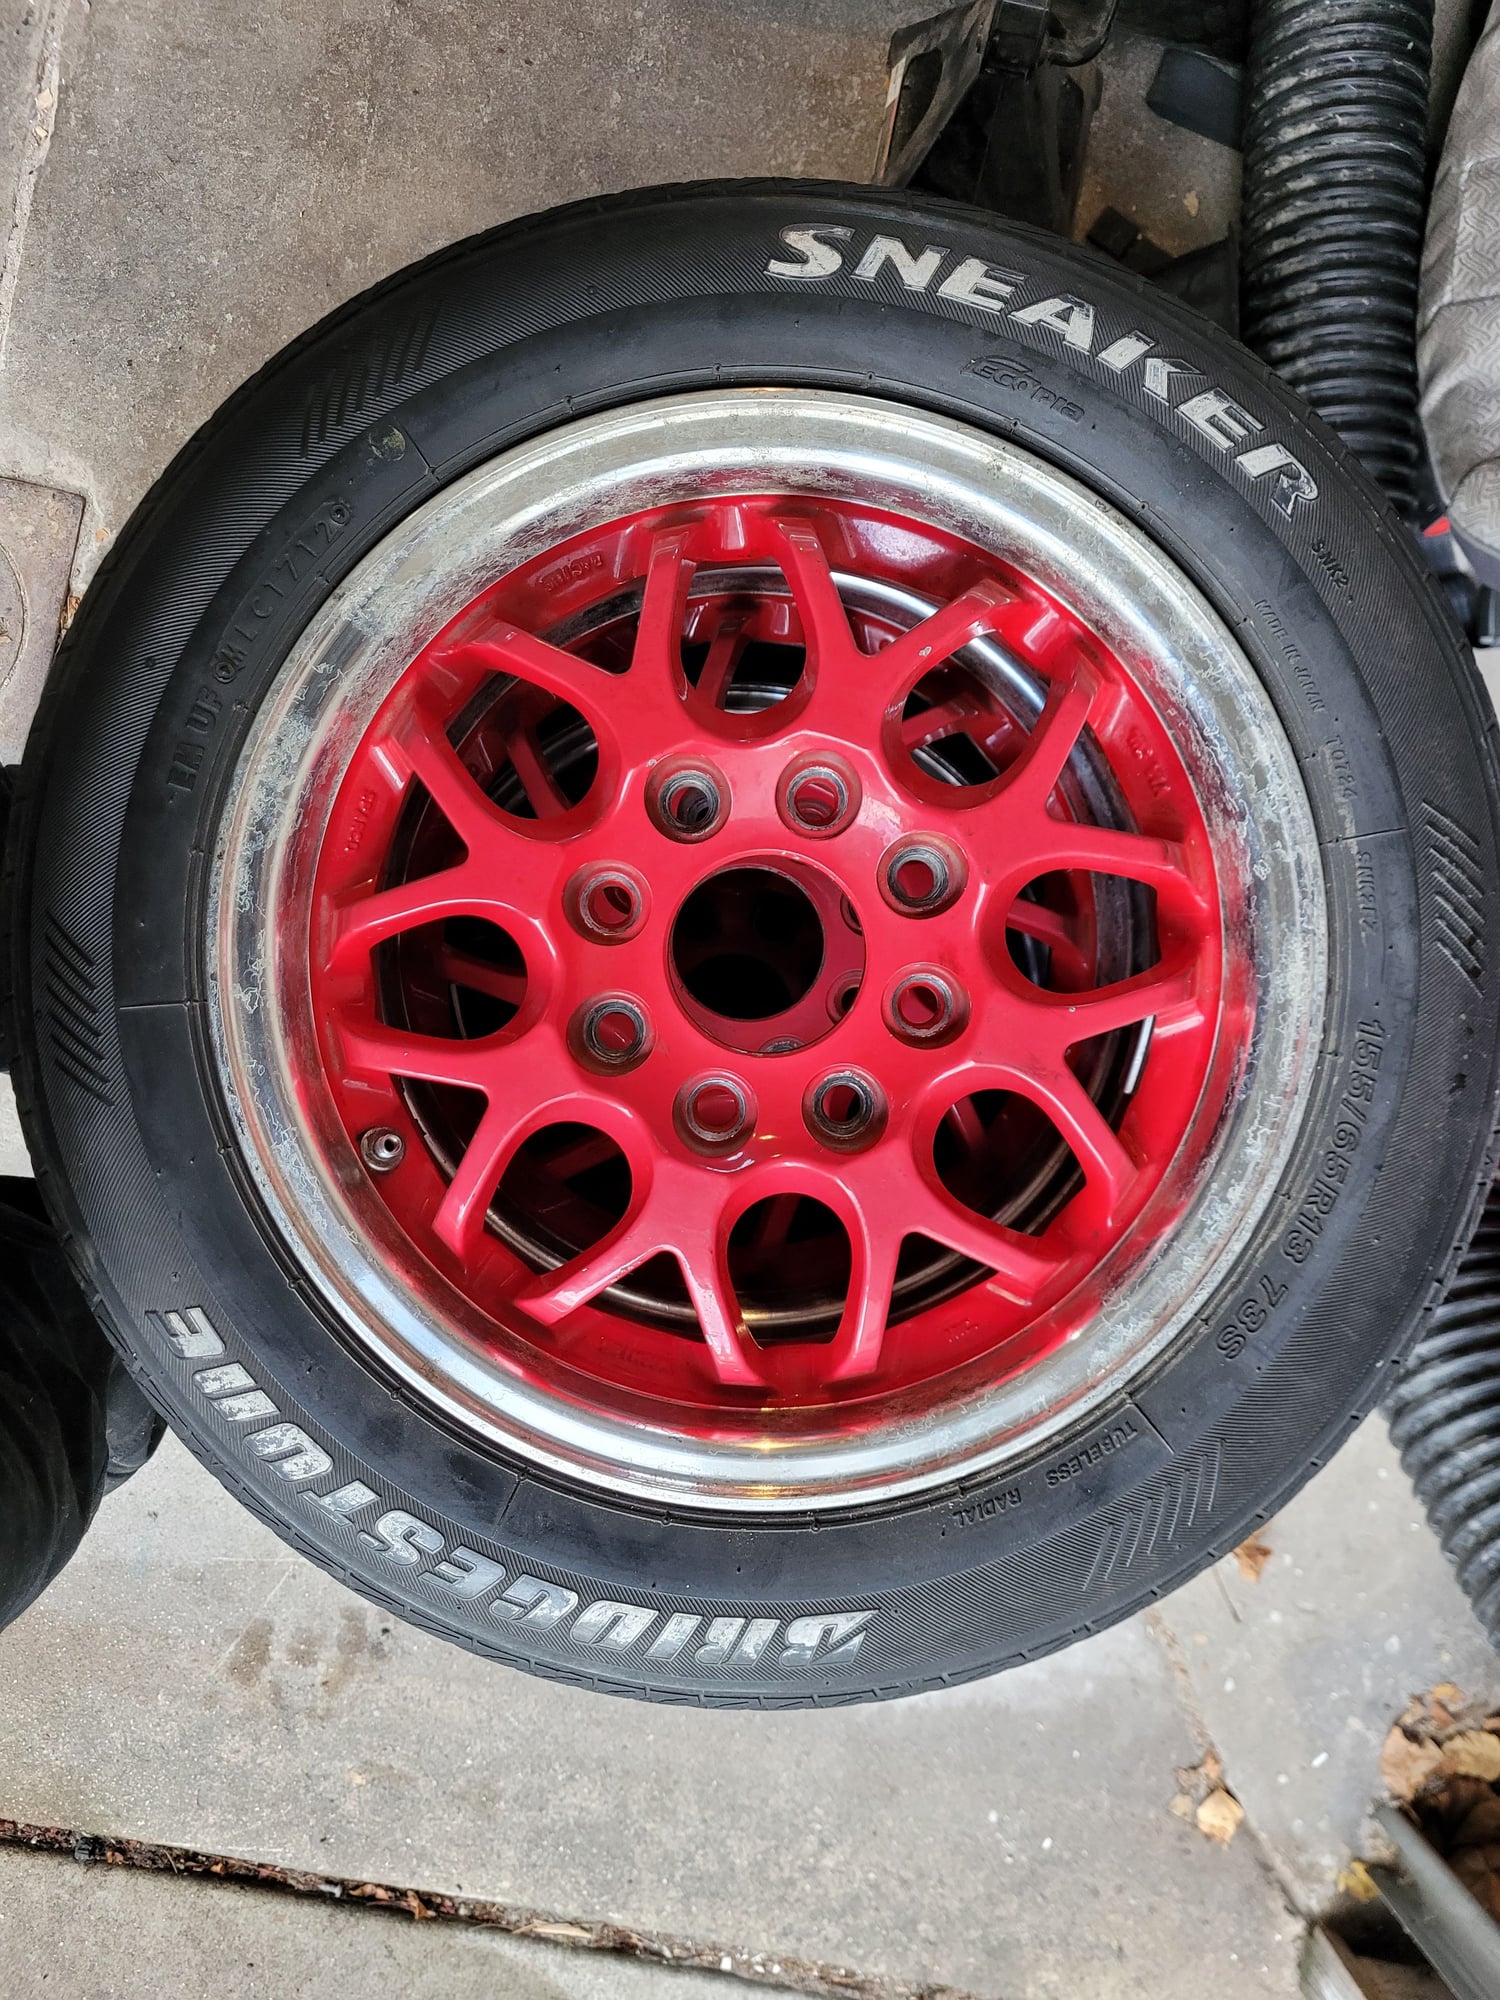 Wheels and Tires/Axles - Sparco NS2 13x5 4x110/114.3 - Used - 1979 to 1985 Mazda RX-7 - Arlington Heights, IL 60005, United States